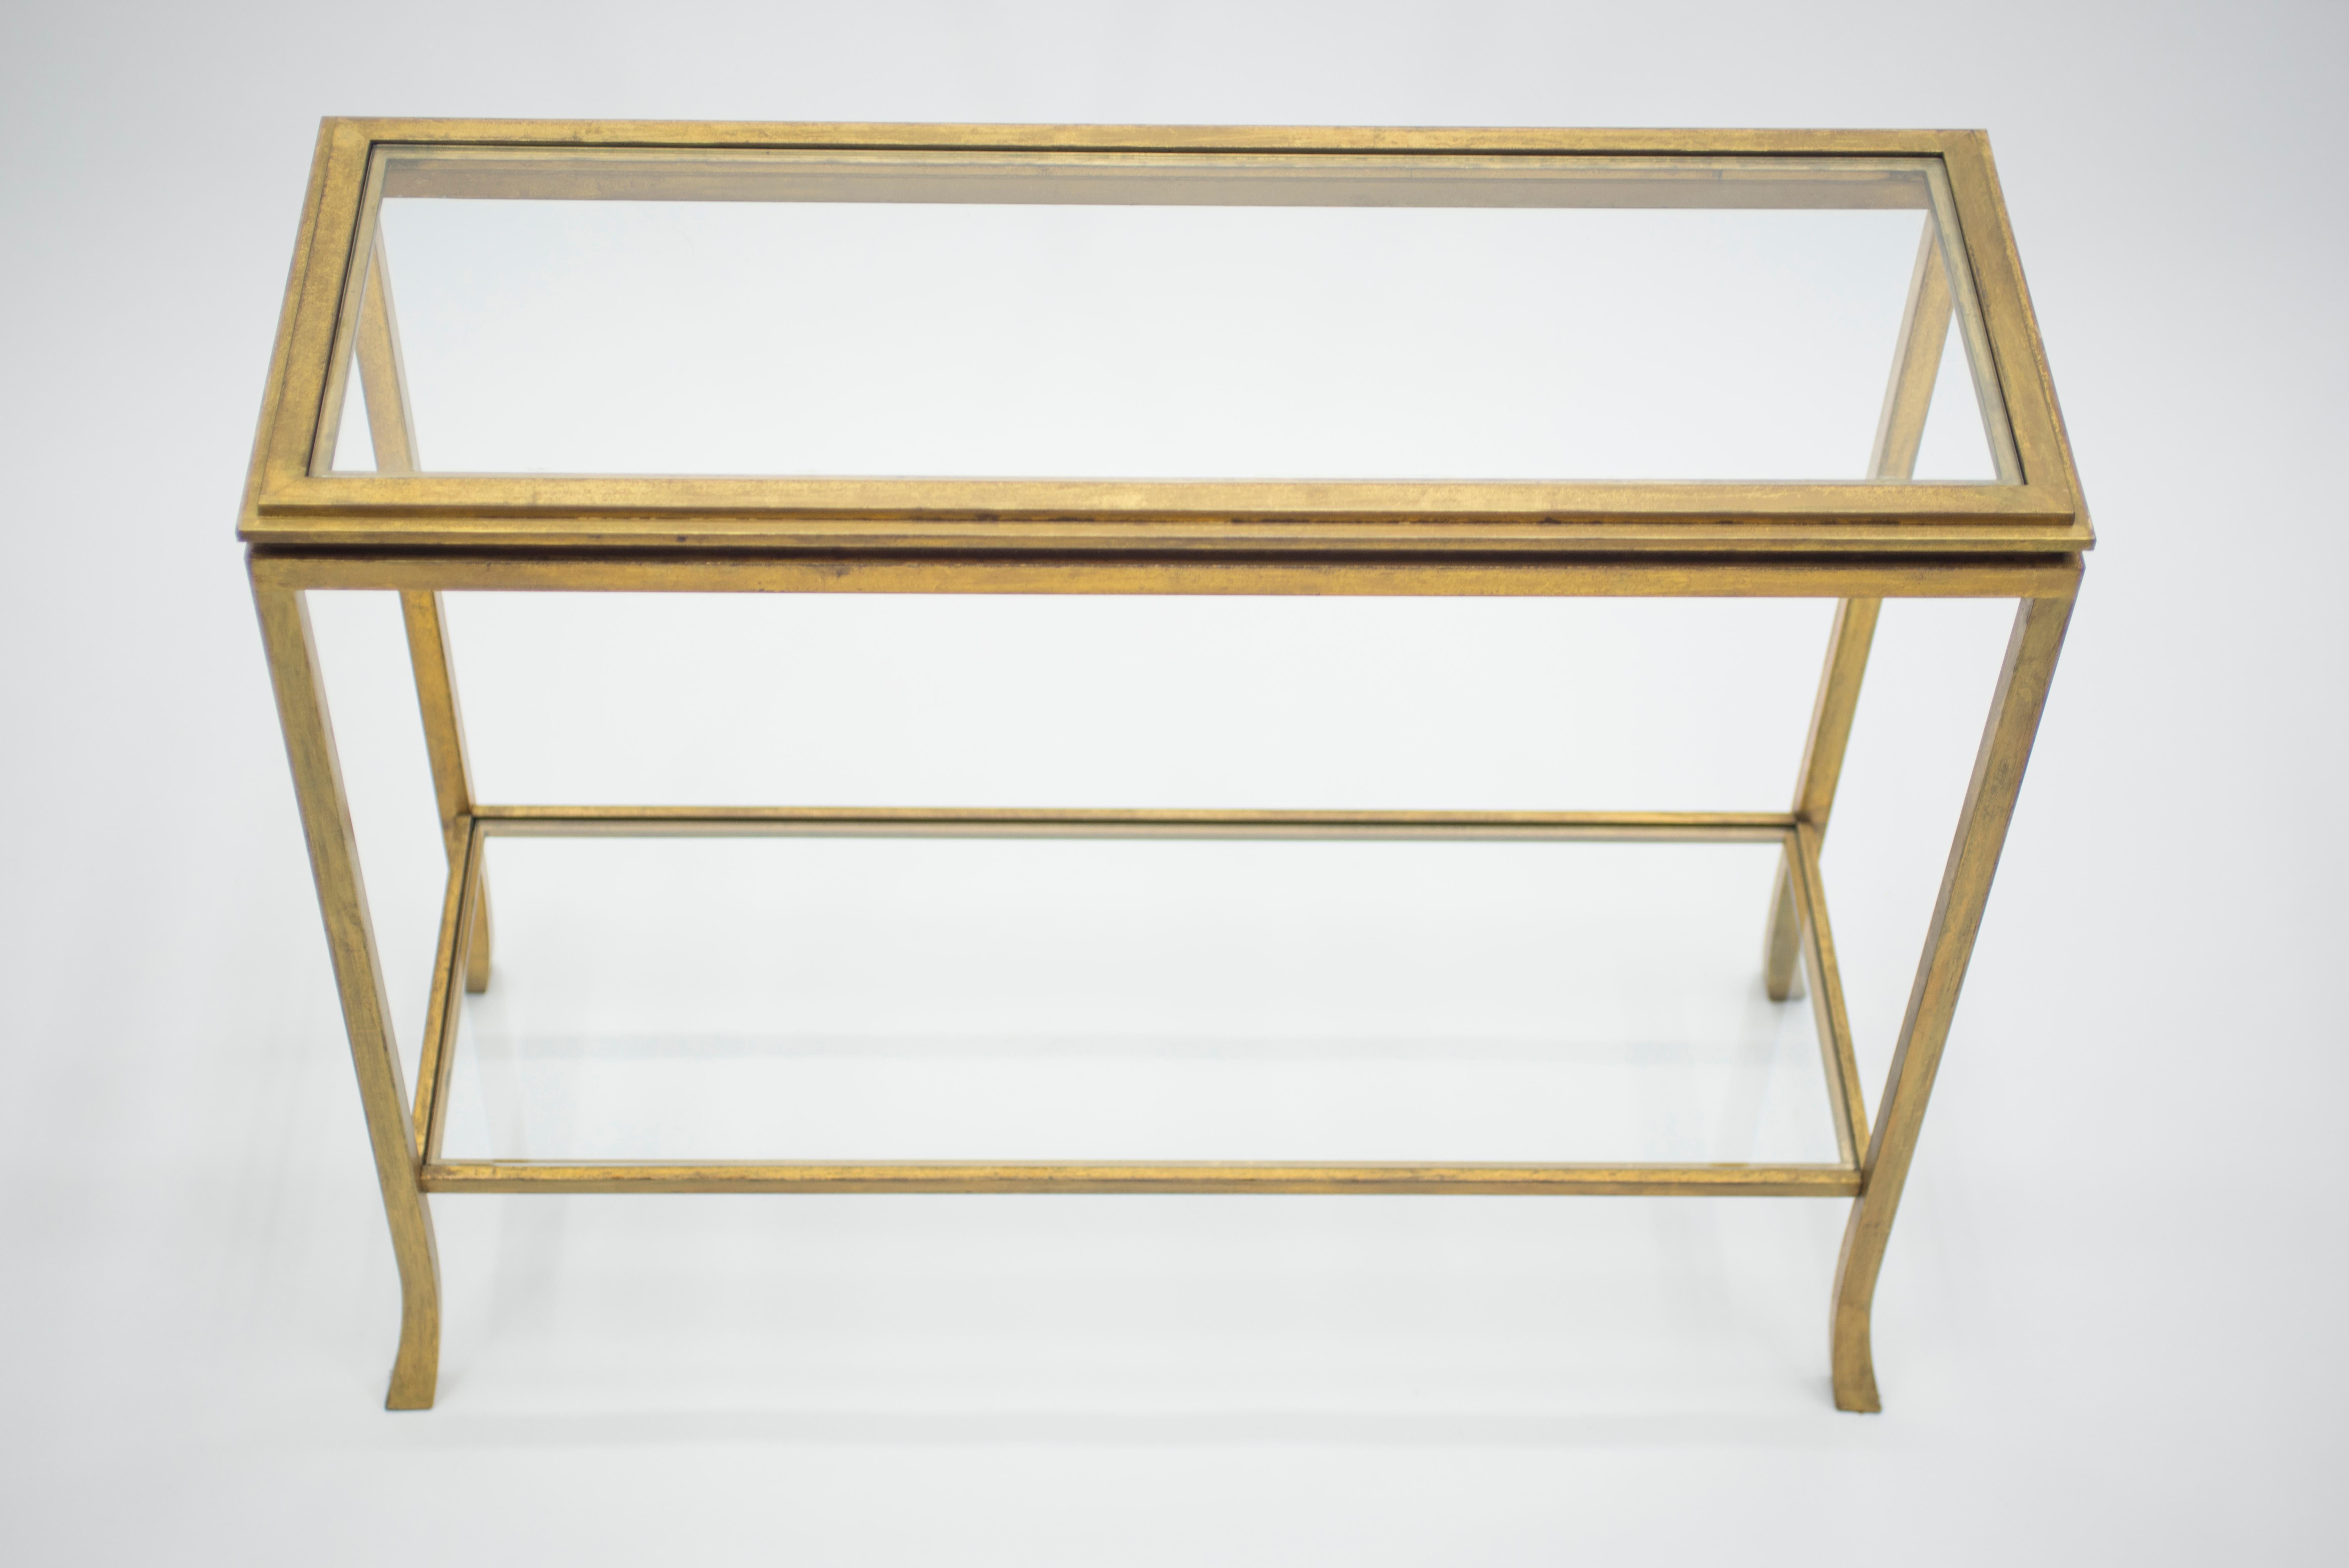 French Rare Mid Century Robert Thibier Gilt Wrought Iron Gold Leaf Console Table, 1960s